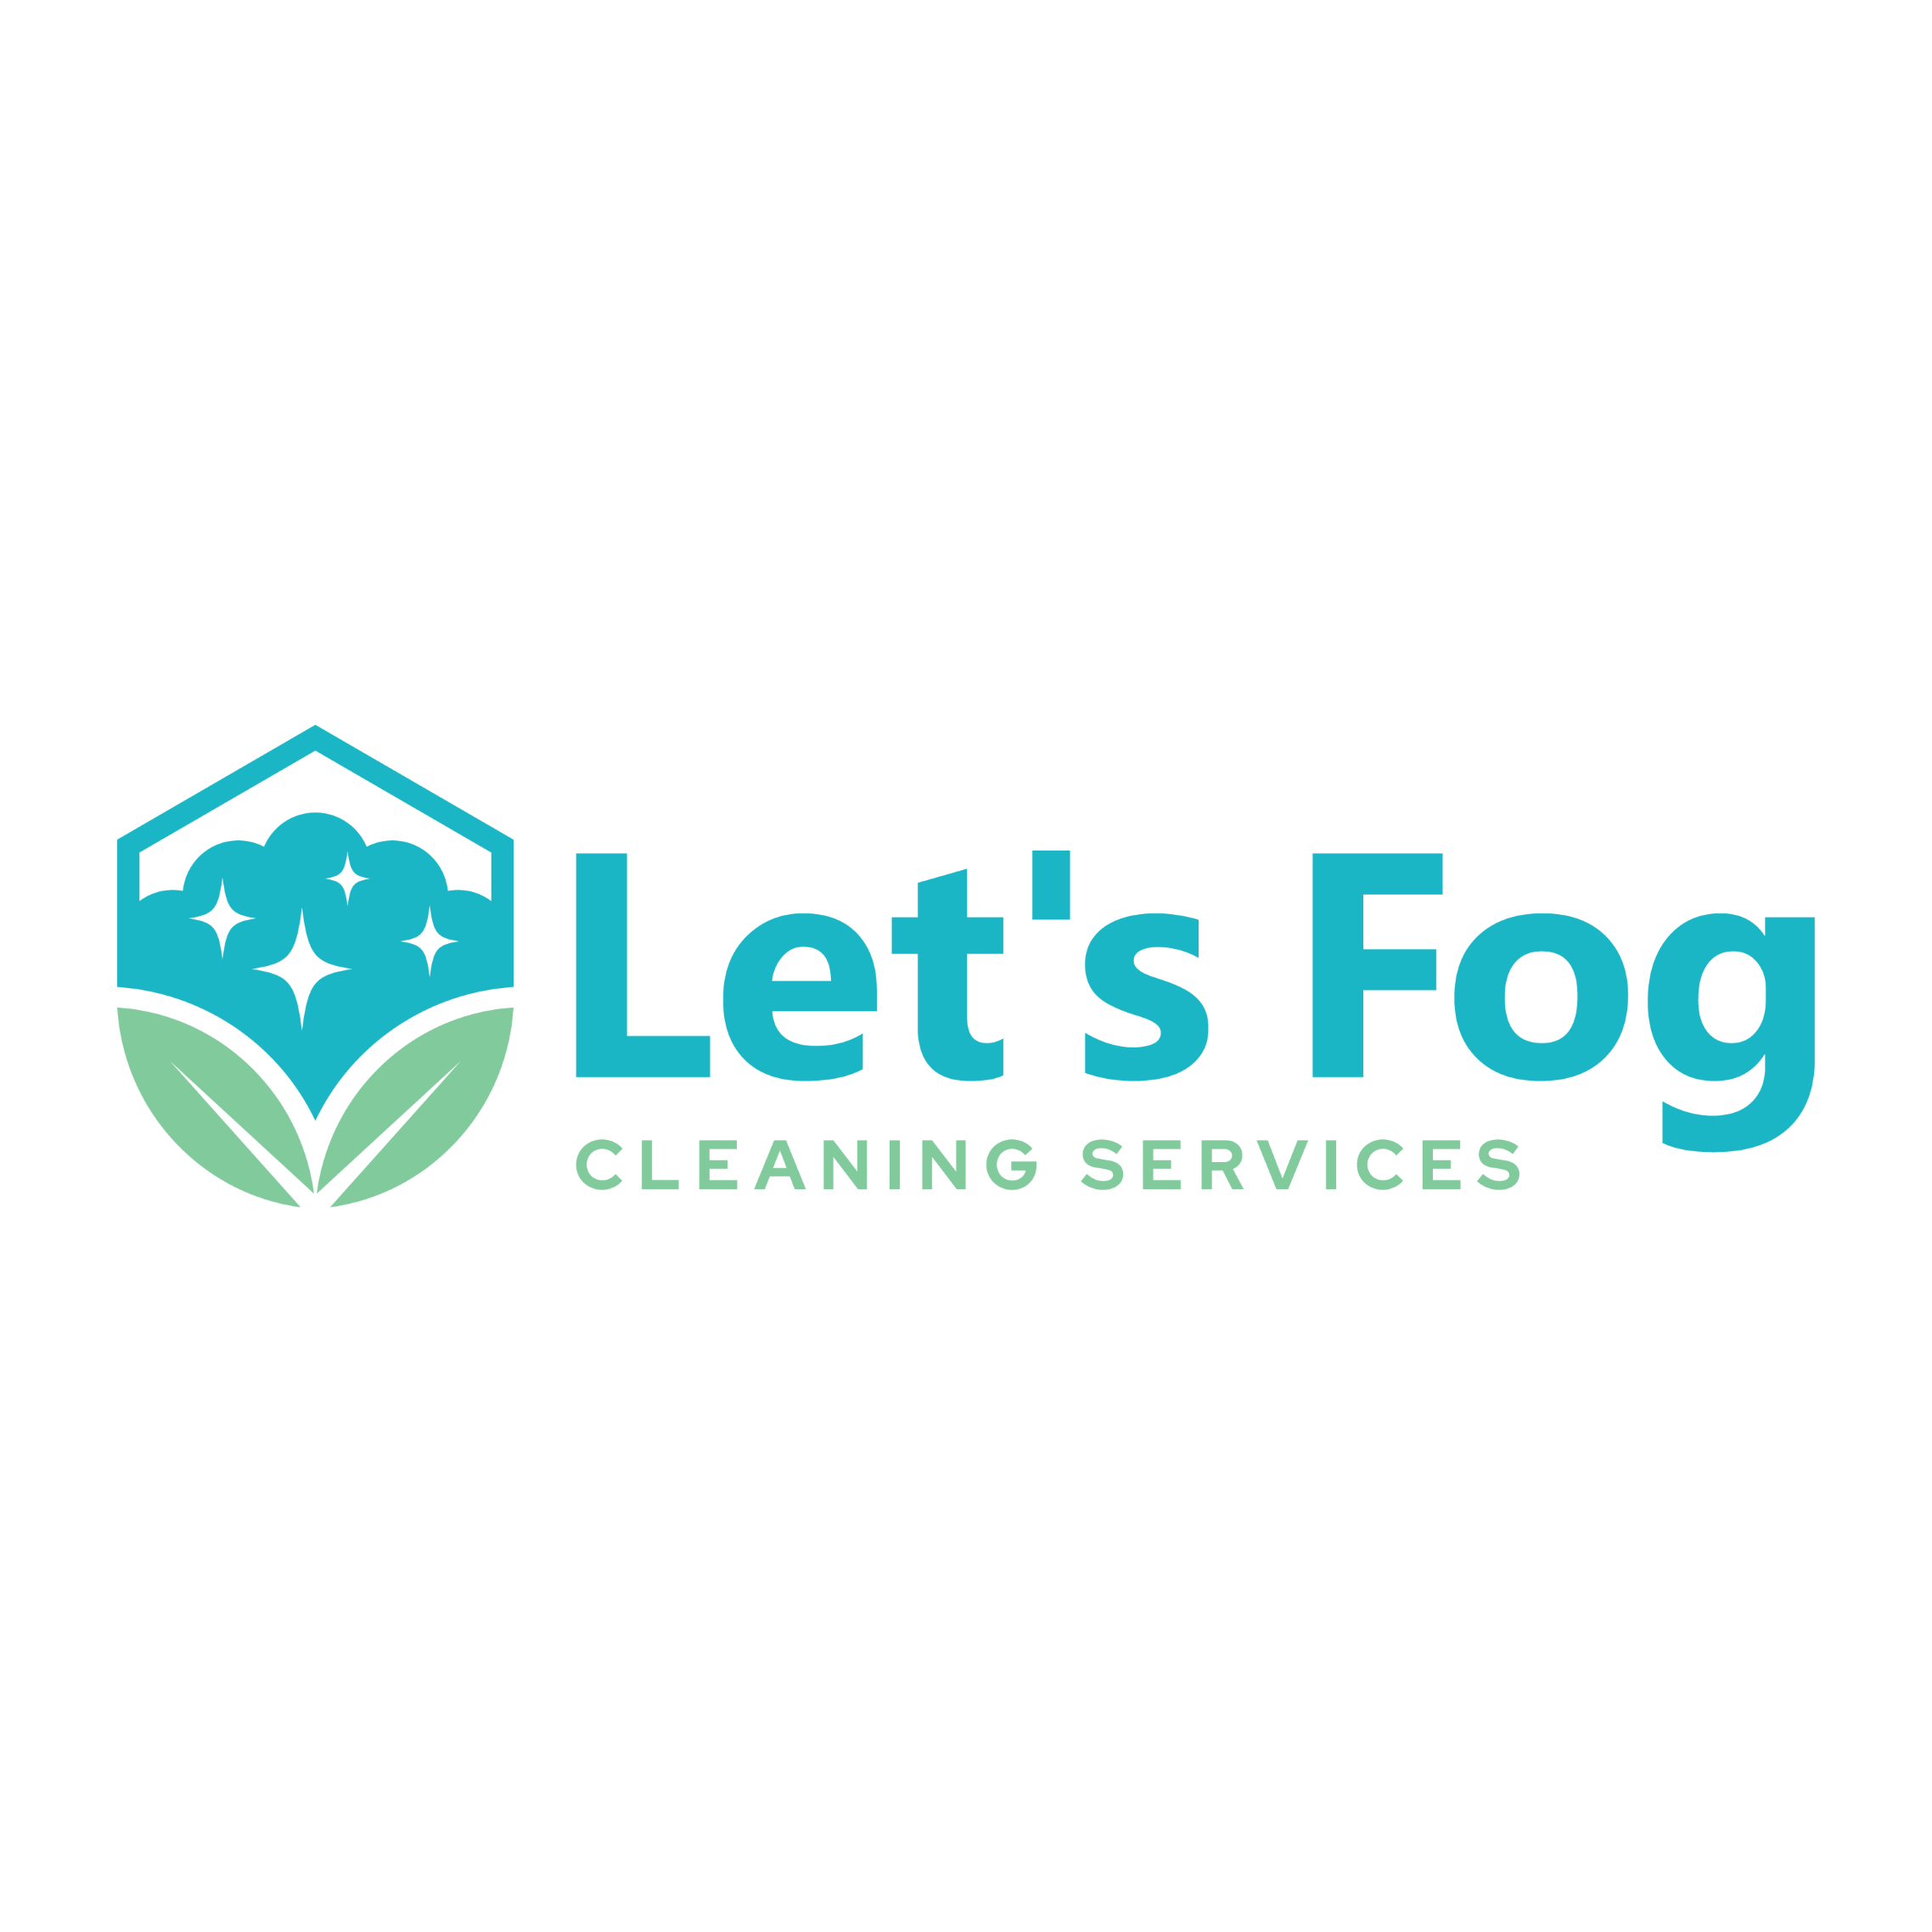 Let's Fog Cleaning Services Logo